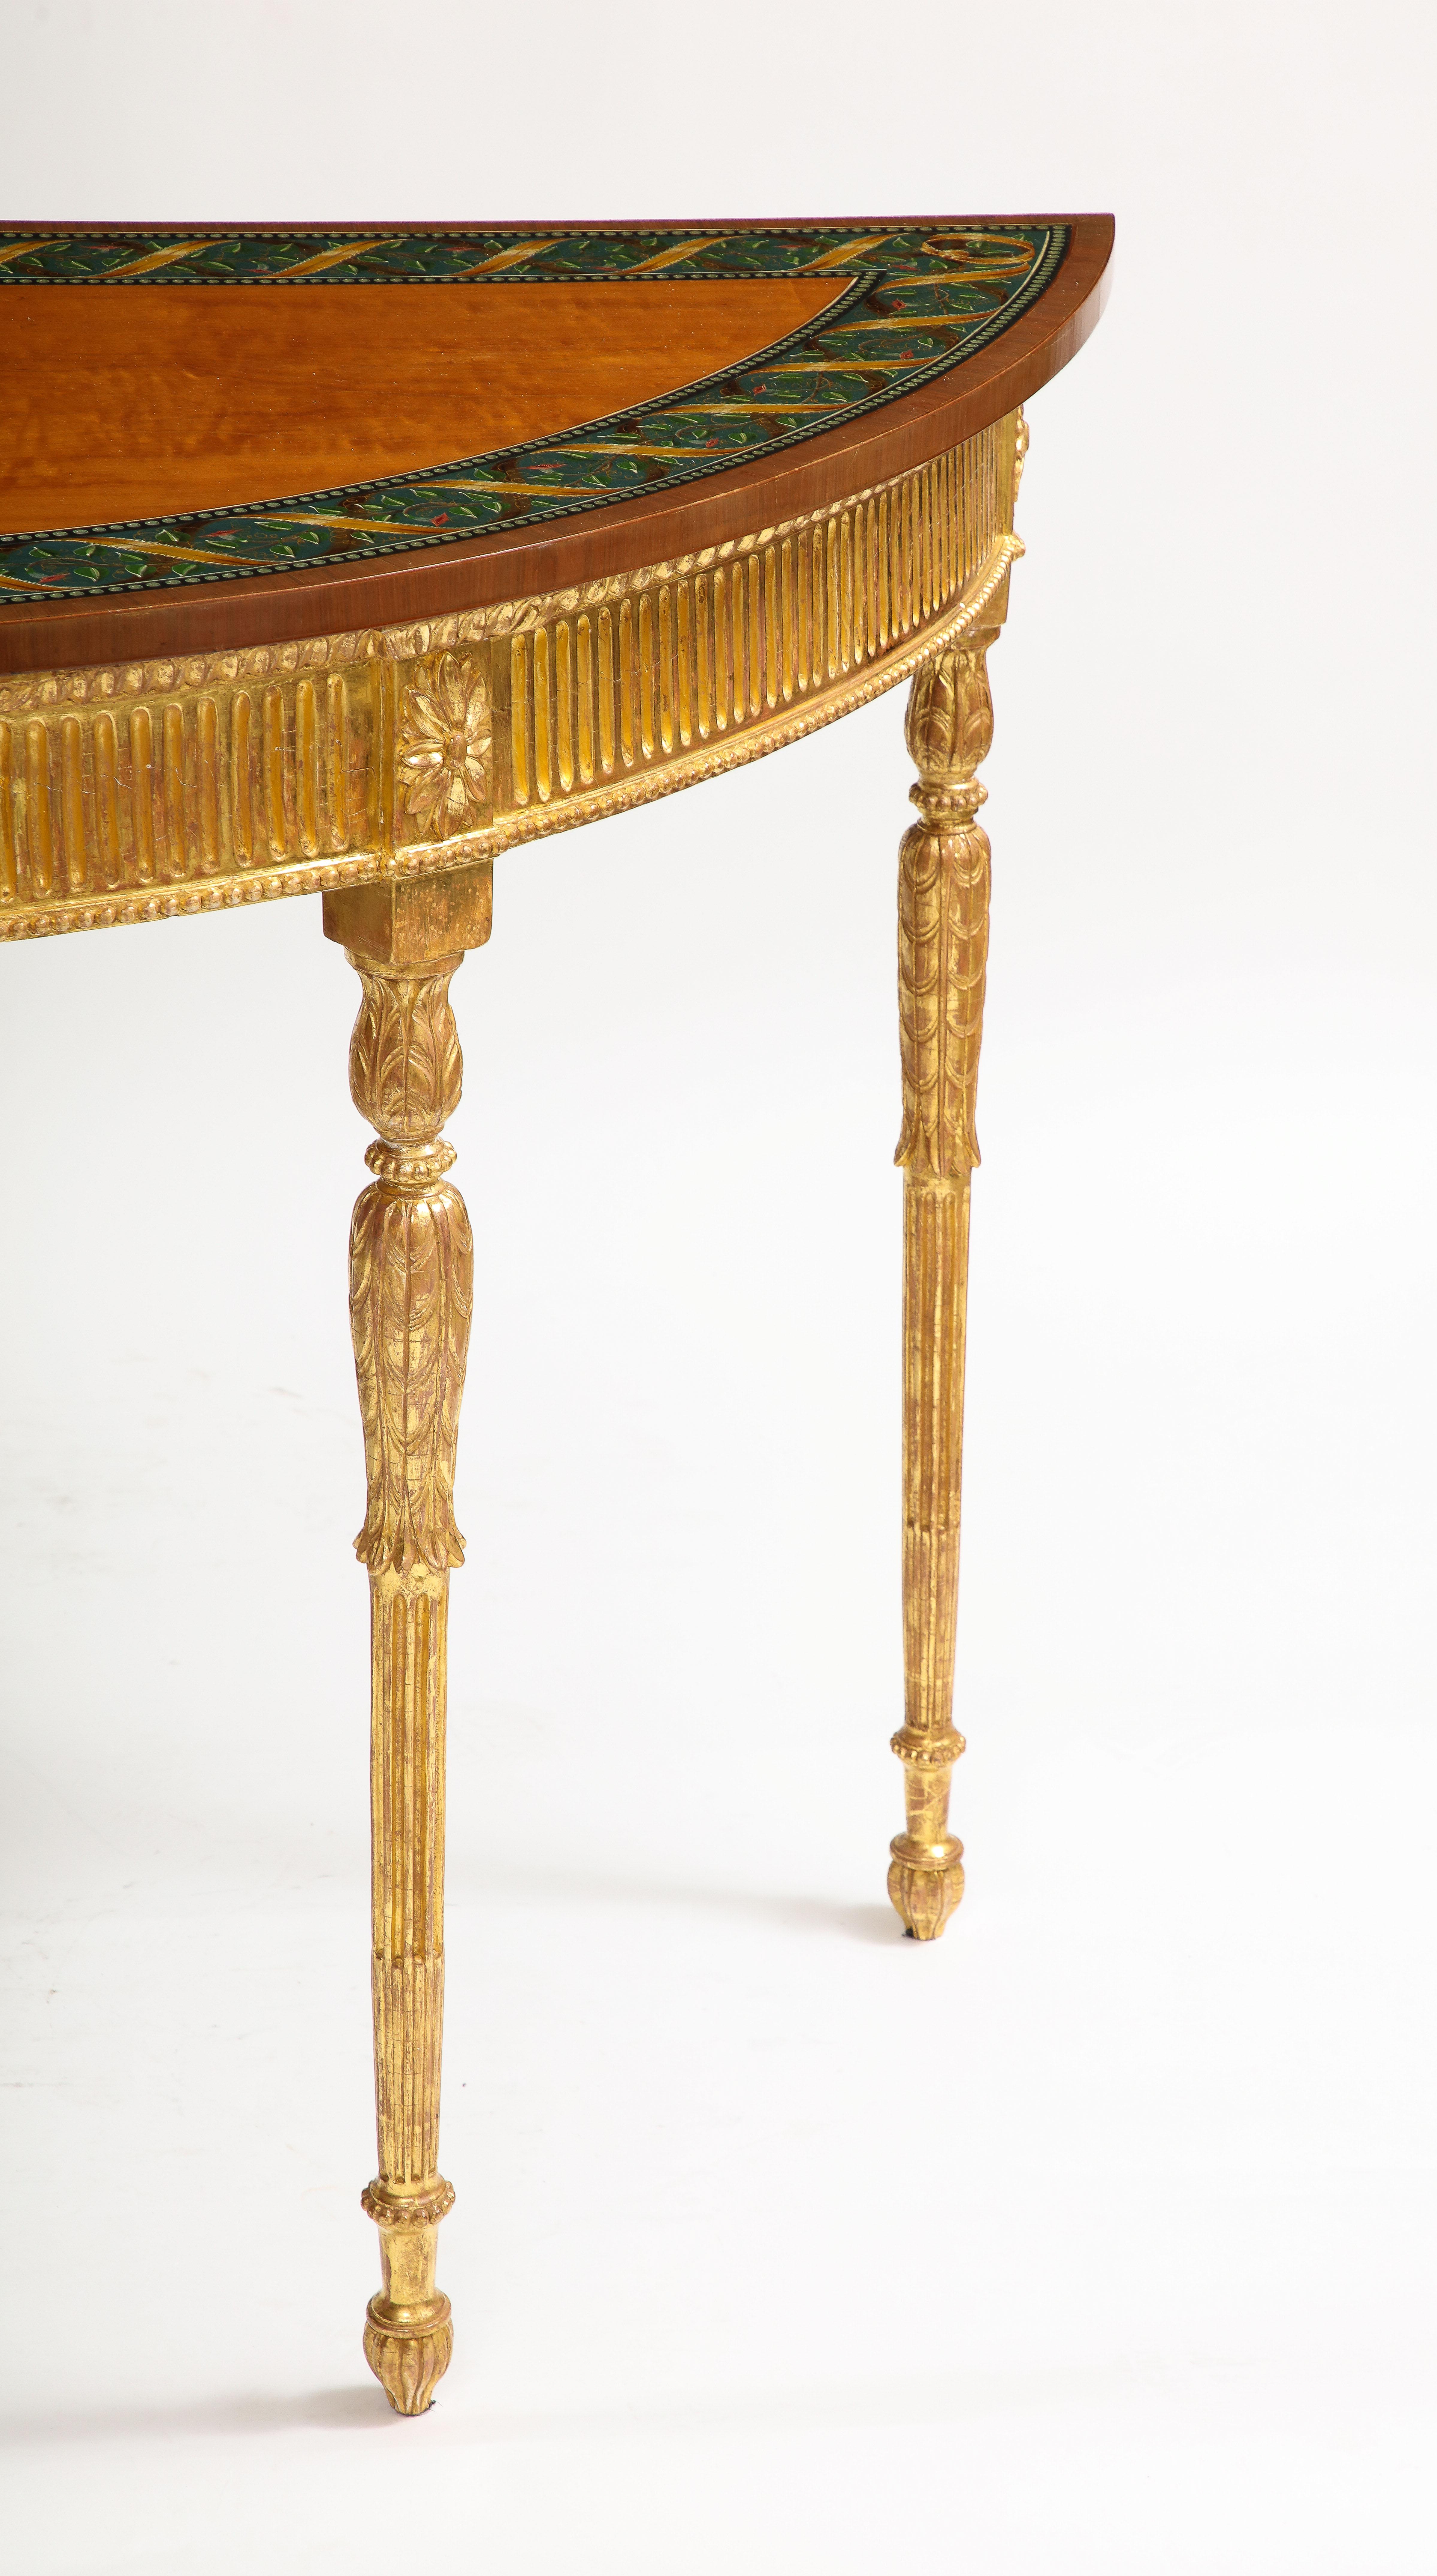 A Pair of 18th C. George III Gilt-Wood Demi-lune Consoles tables w/ Painted Tops For Sale 4